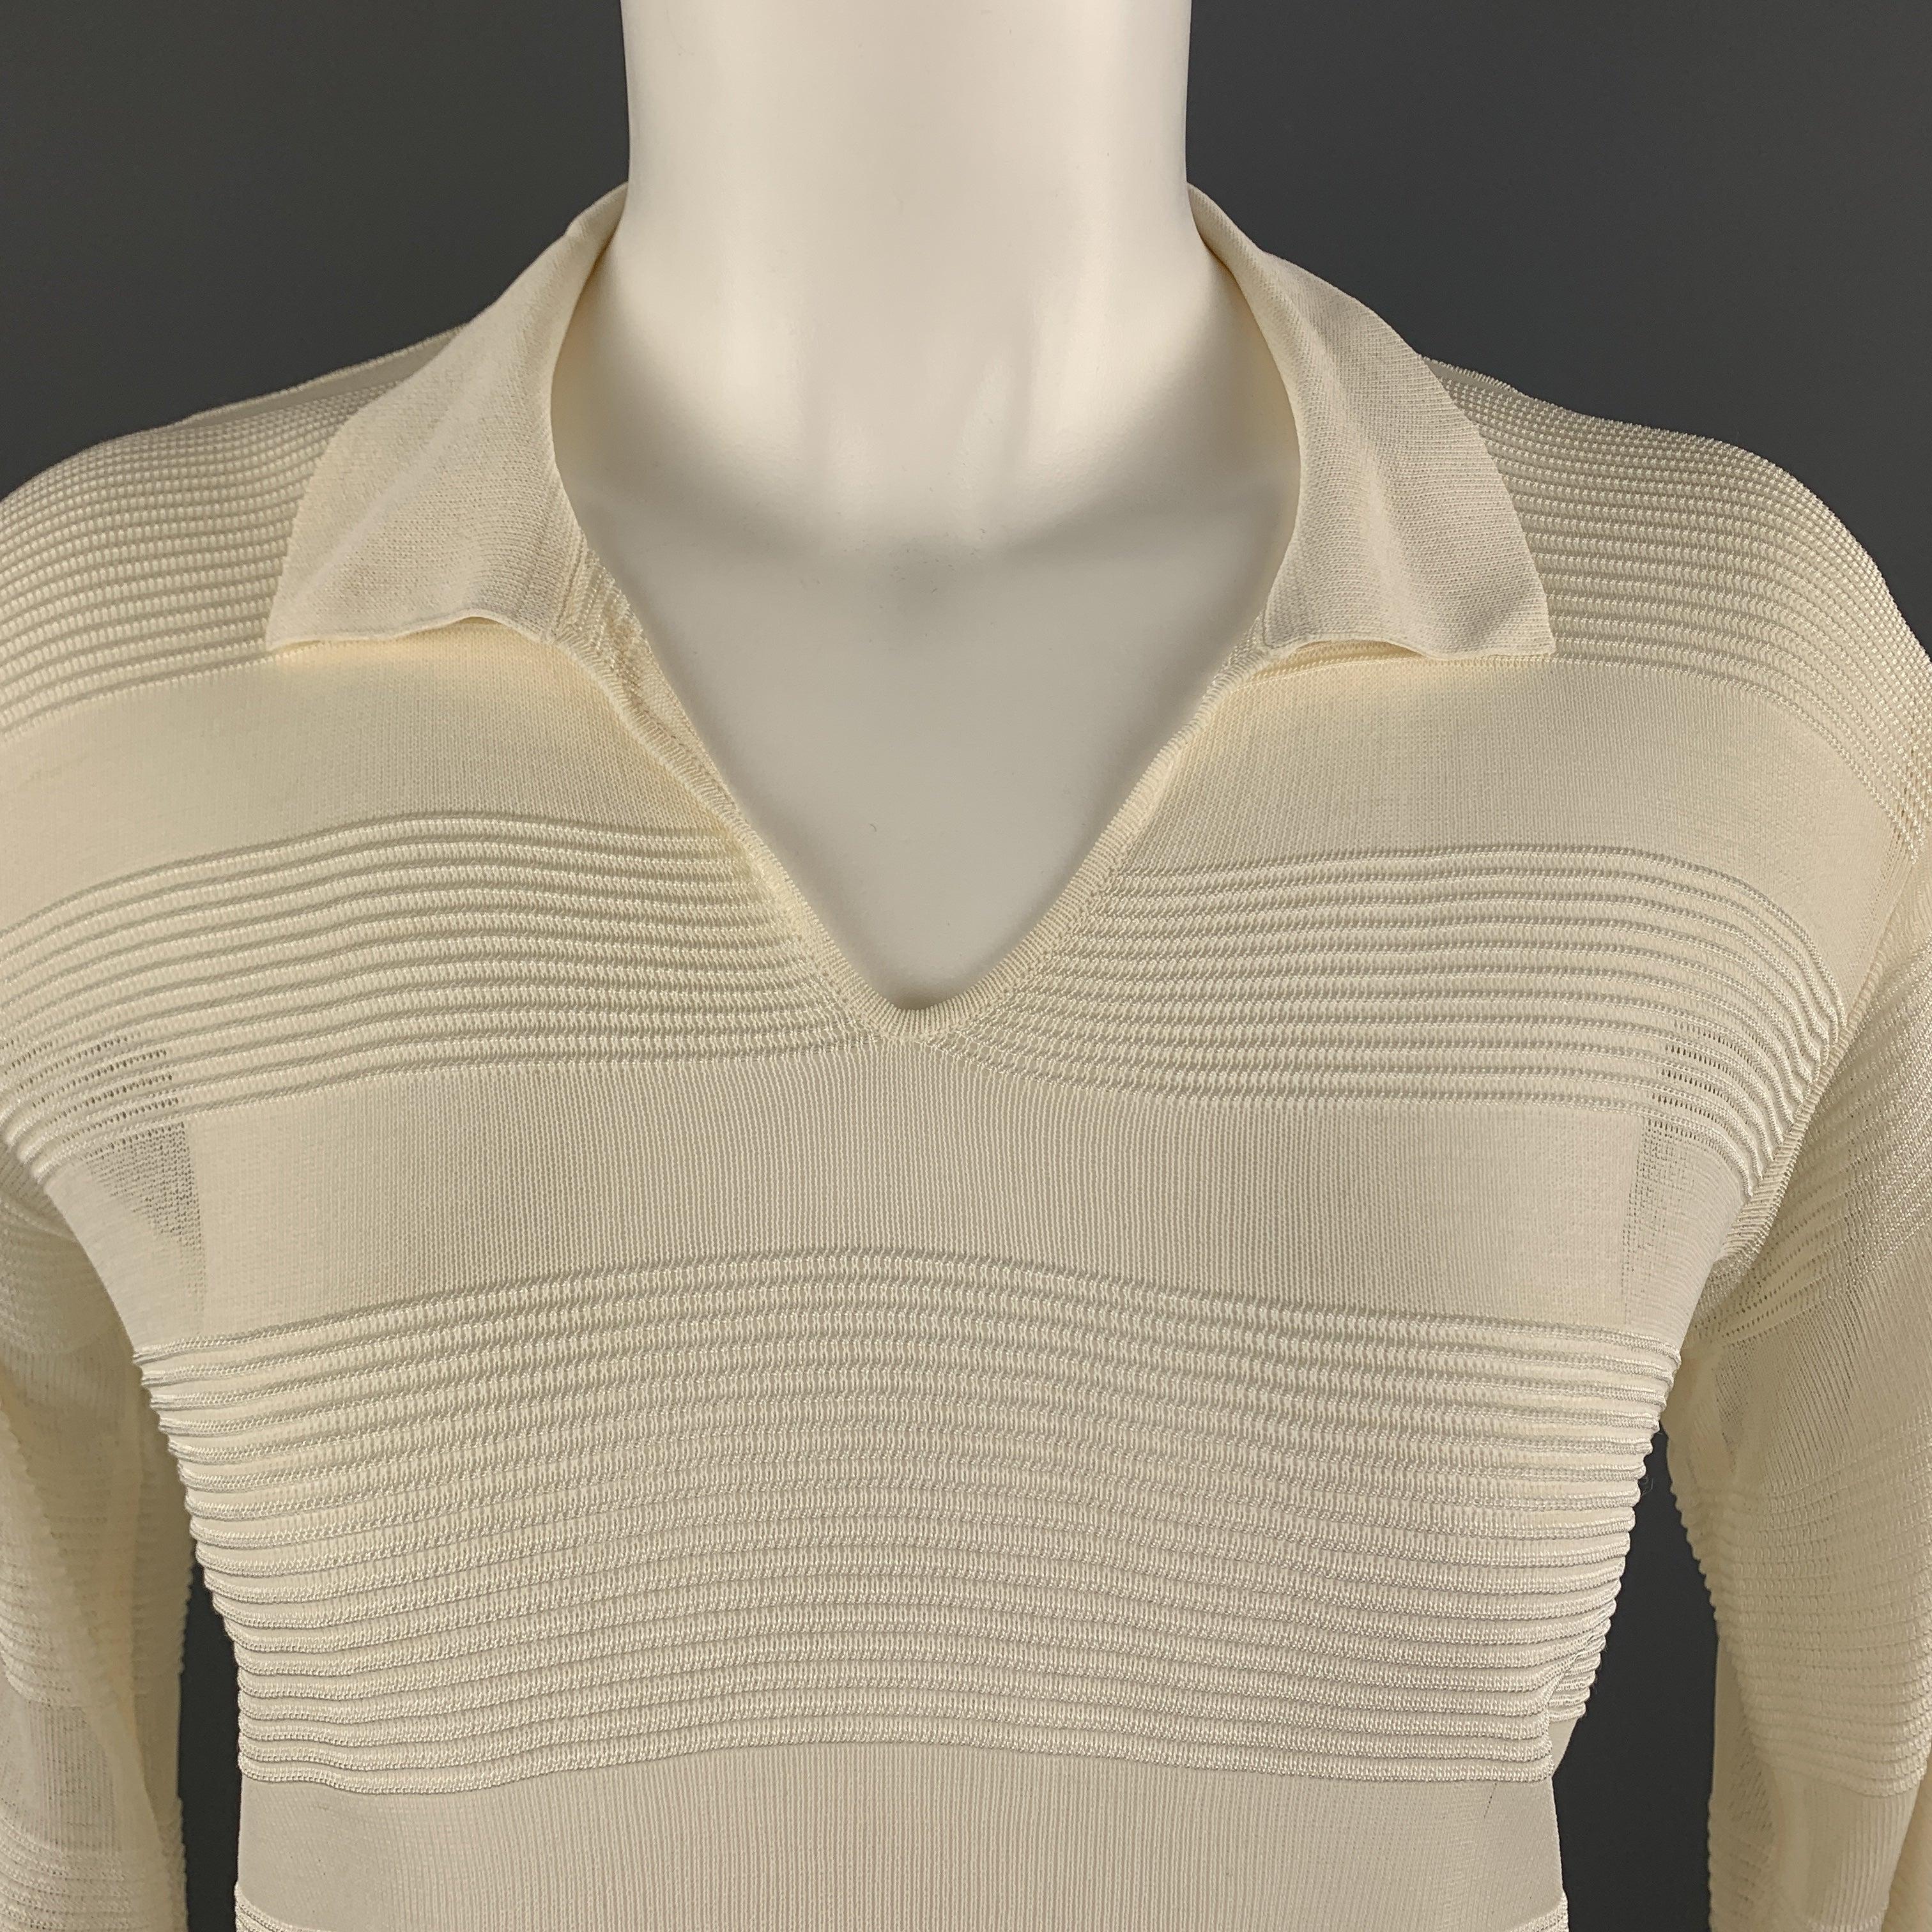 GIORGIO ARMANI pullover comes in cream burnout ribbed stripe sheer knit with a collared V neck. Made in Italy.Excellent
Pre-Owned Condition. 

Marked:   IT 40 

Measurements: 
 
Shoulder:
17 inches Bust:
38 inches Sleeve:
23 inches Length: 23 inches